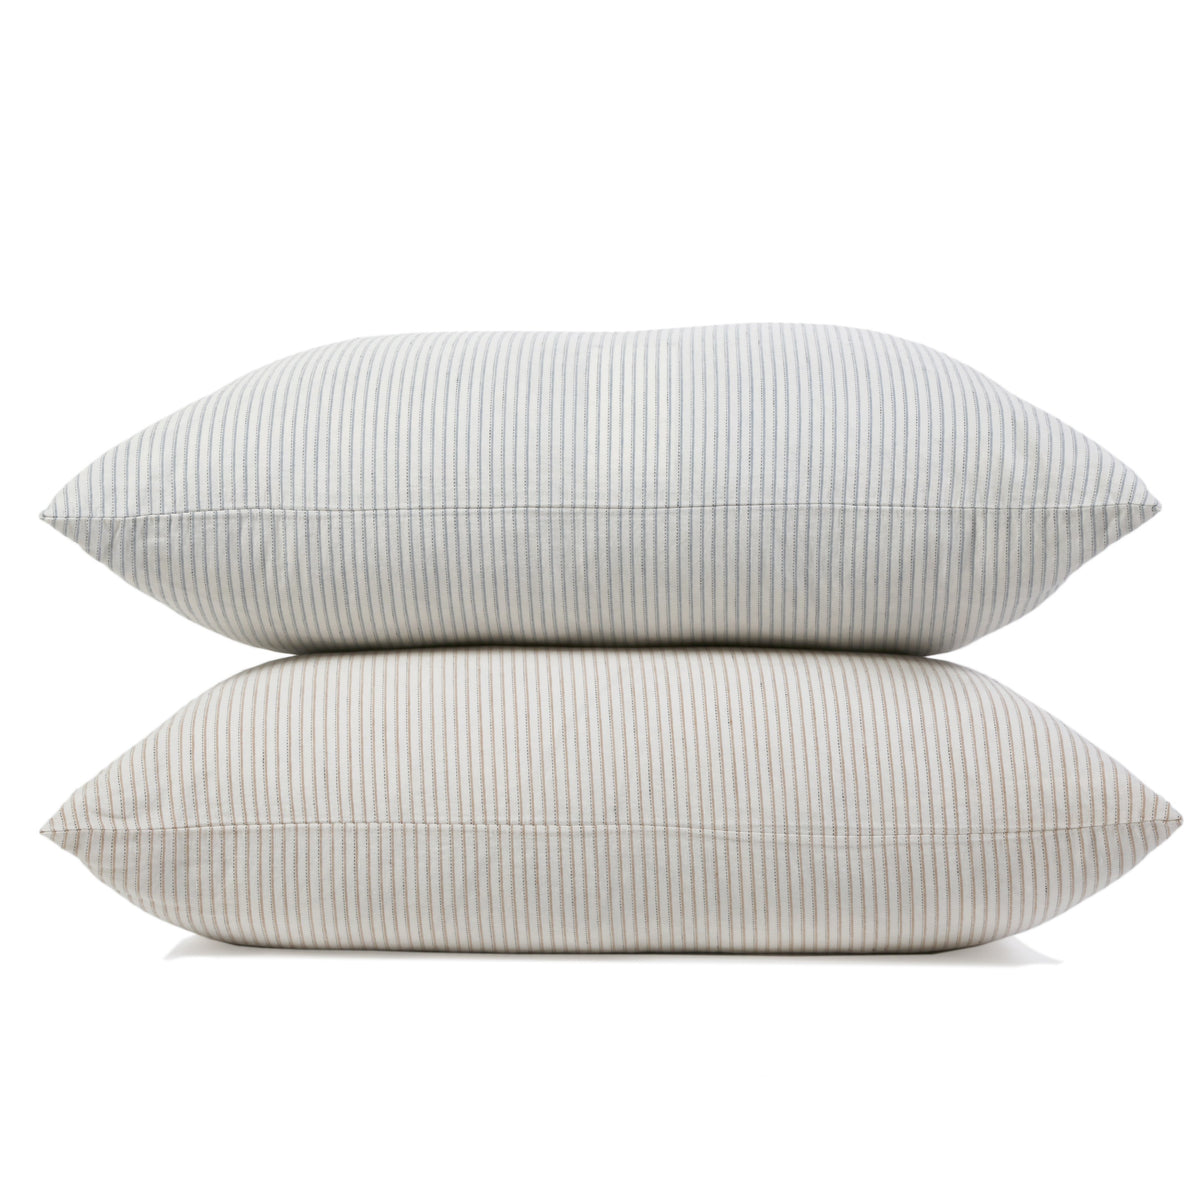 Connor Big Pillow With Insert – Pom Pom at Home